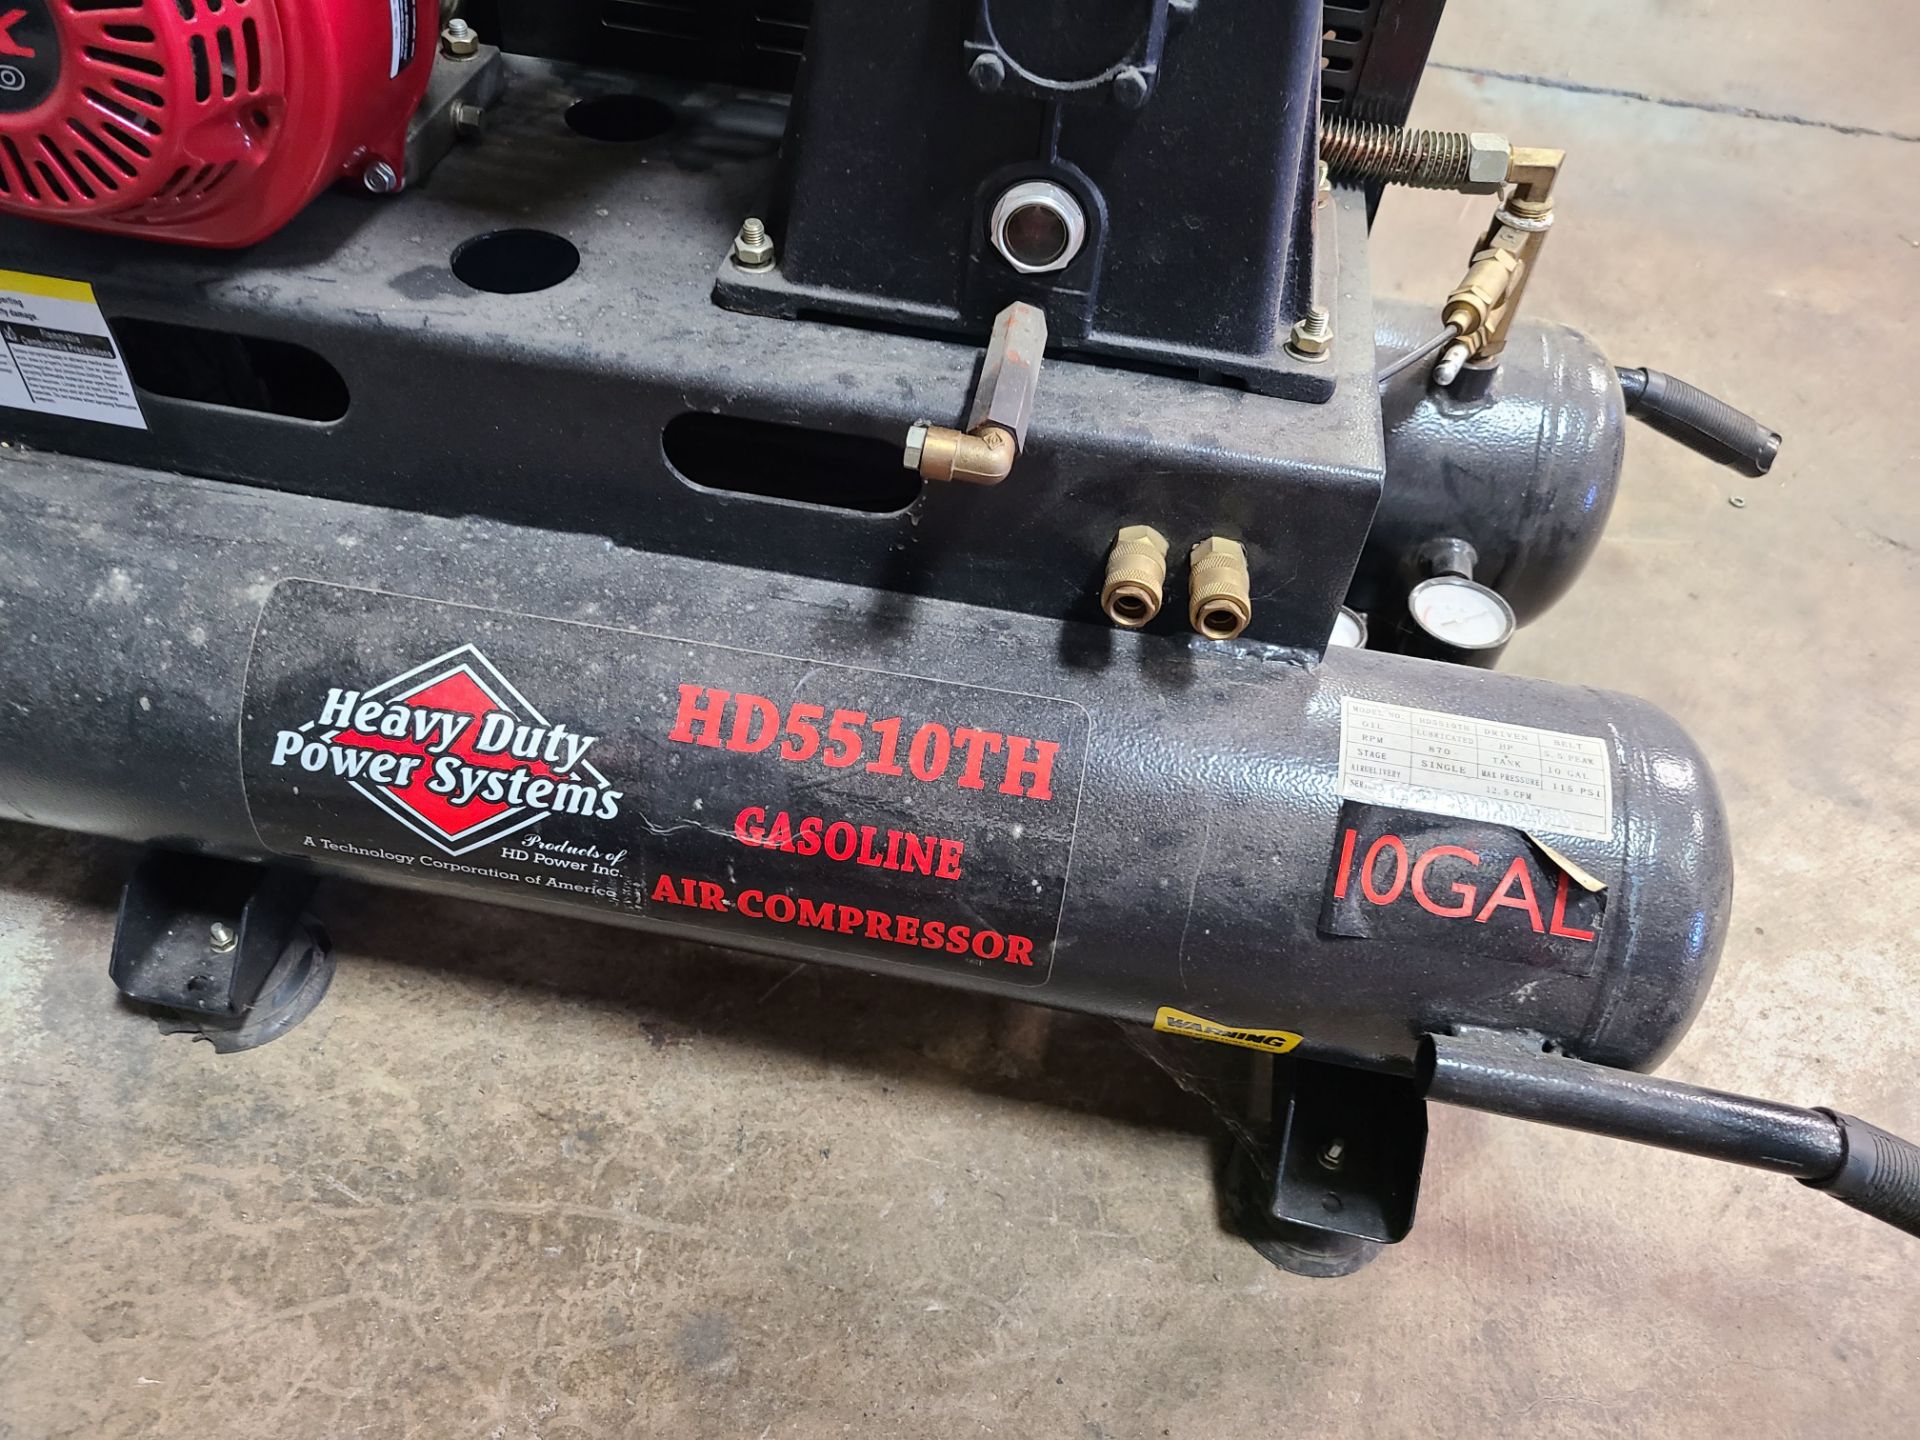 HEAVY DUTY POWER SYSTEMS PORTABLE AIR COMPRESSOR MODEL # H05510TH - Image 2 of 2